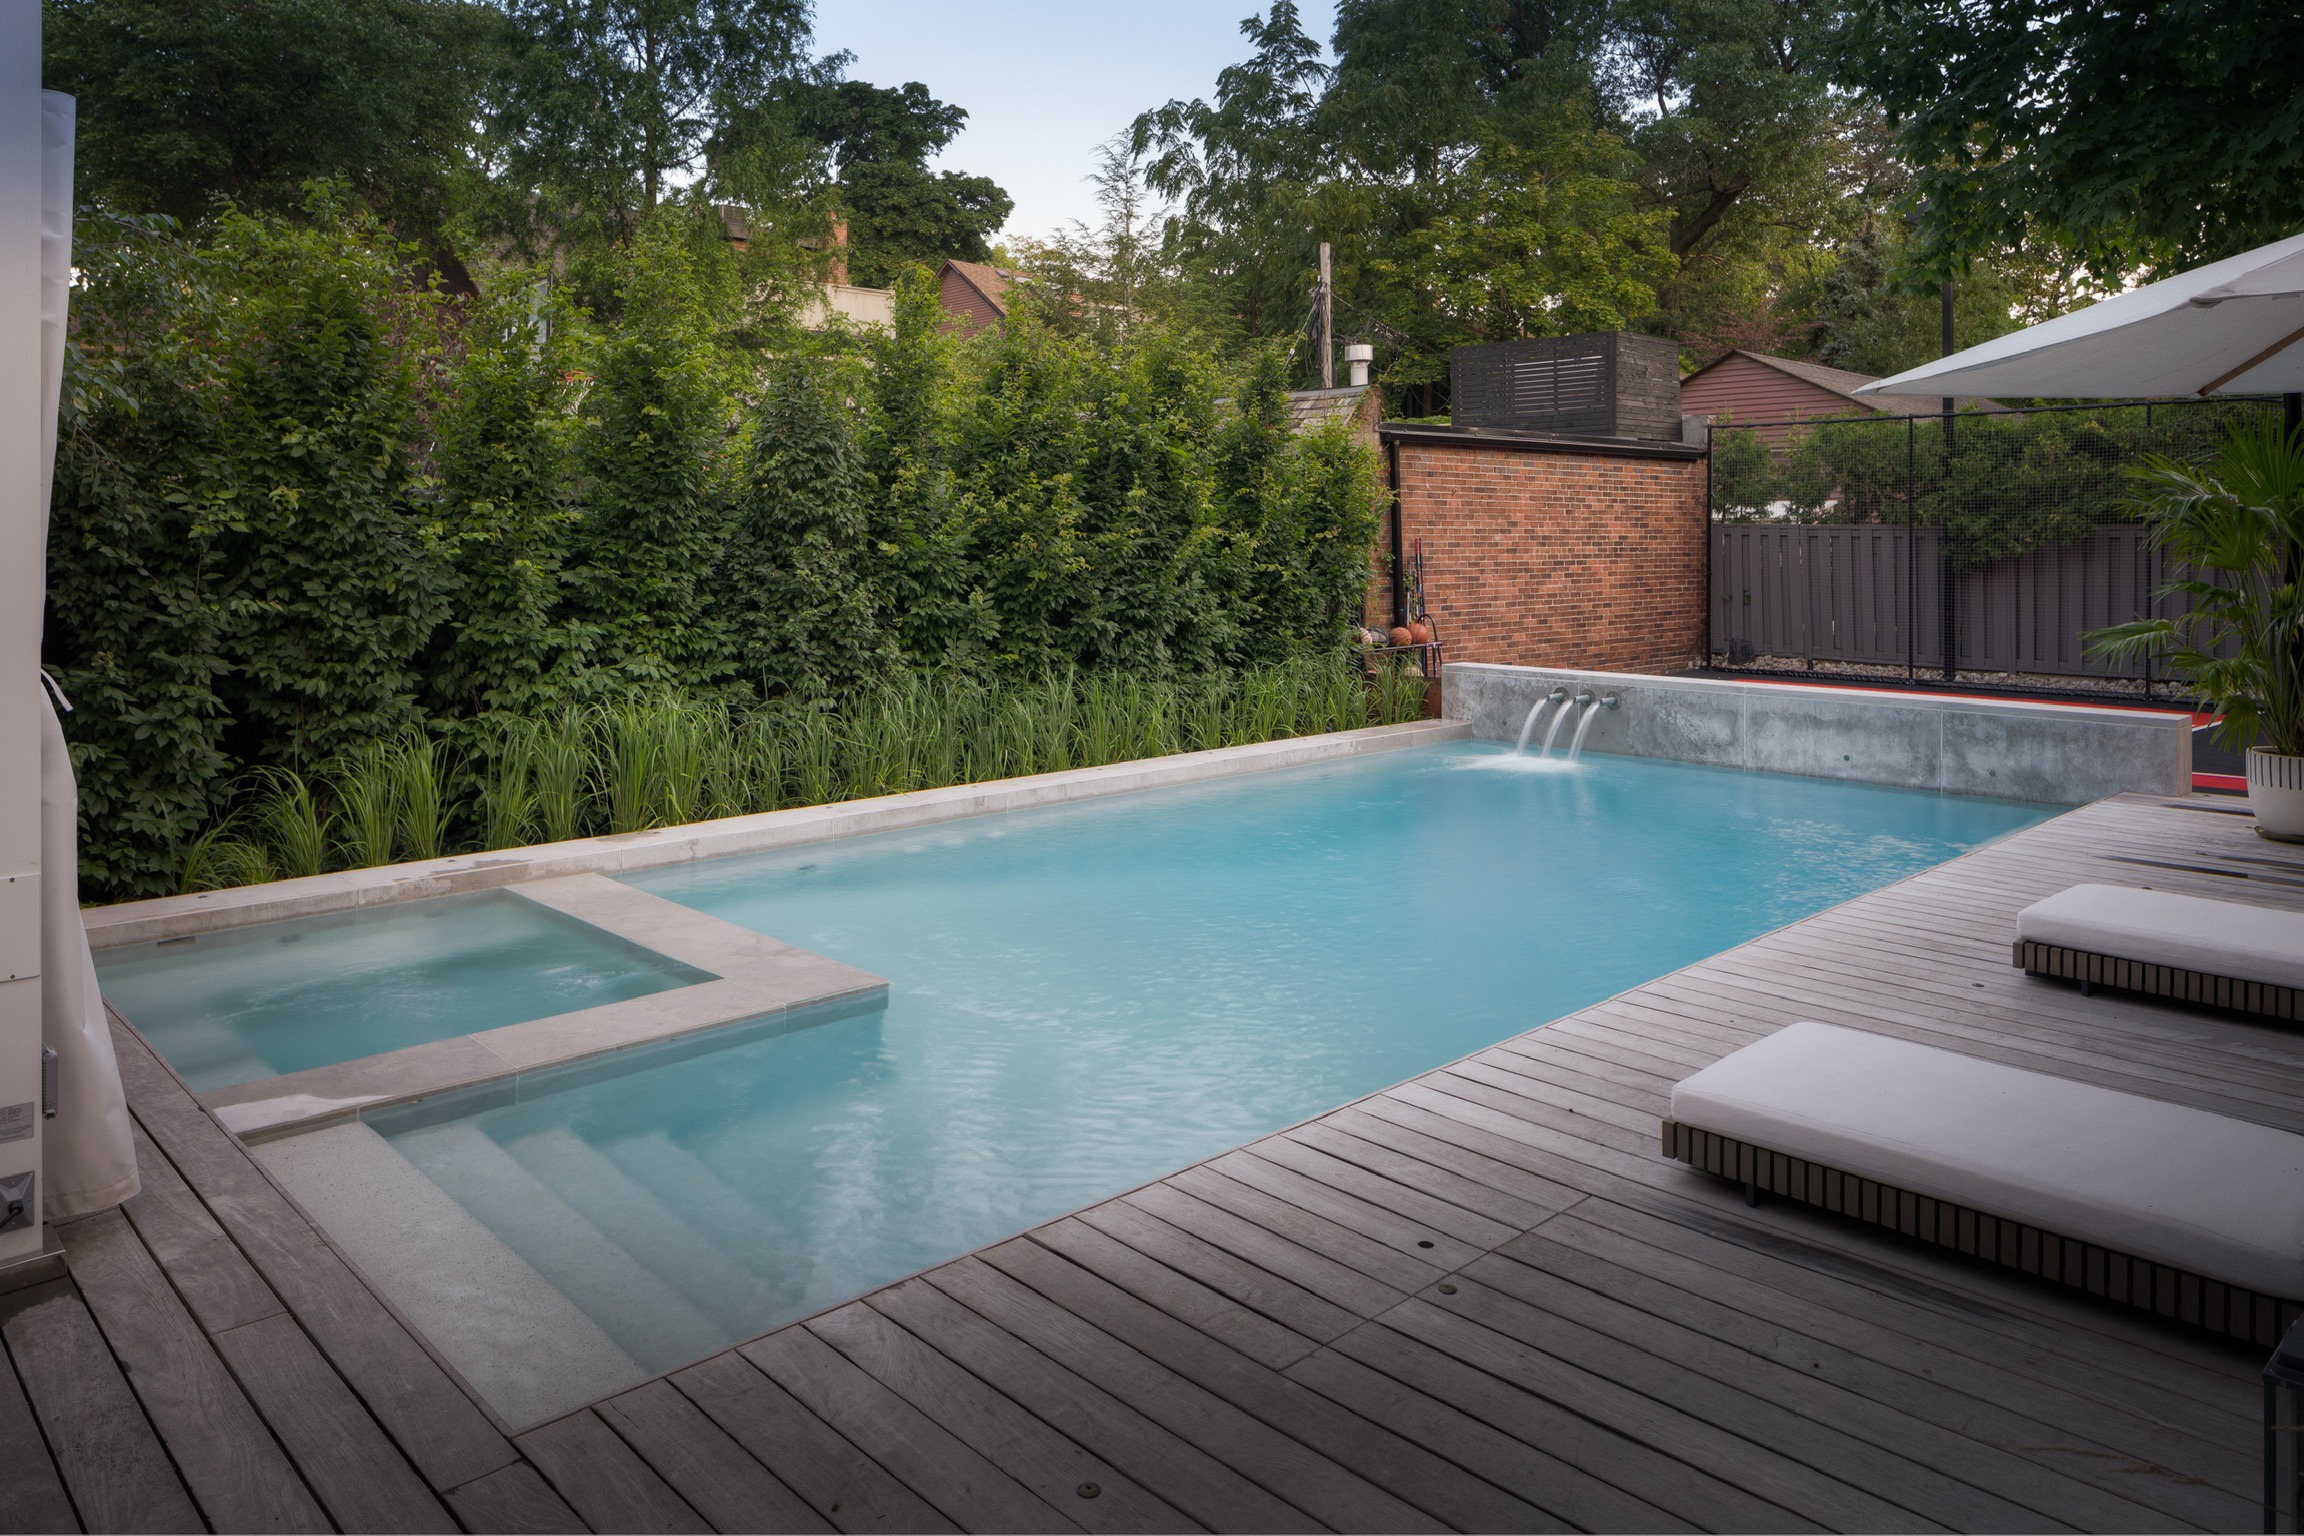 A serene backyard setting with a large swimming pool, surrounded by wooden decking and lush greenery, featuring a hot tub and recliners.